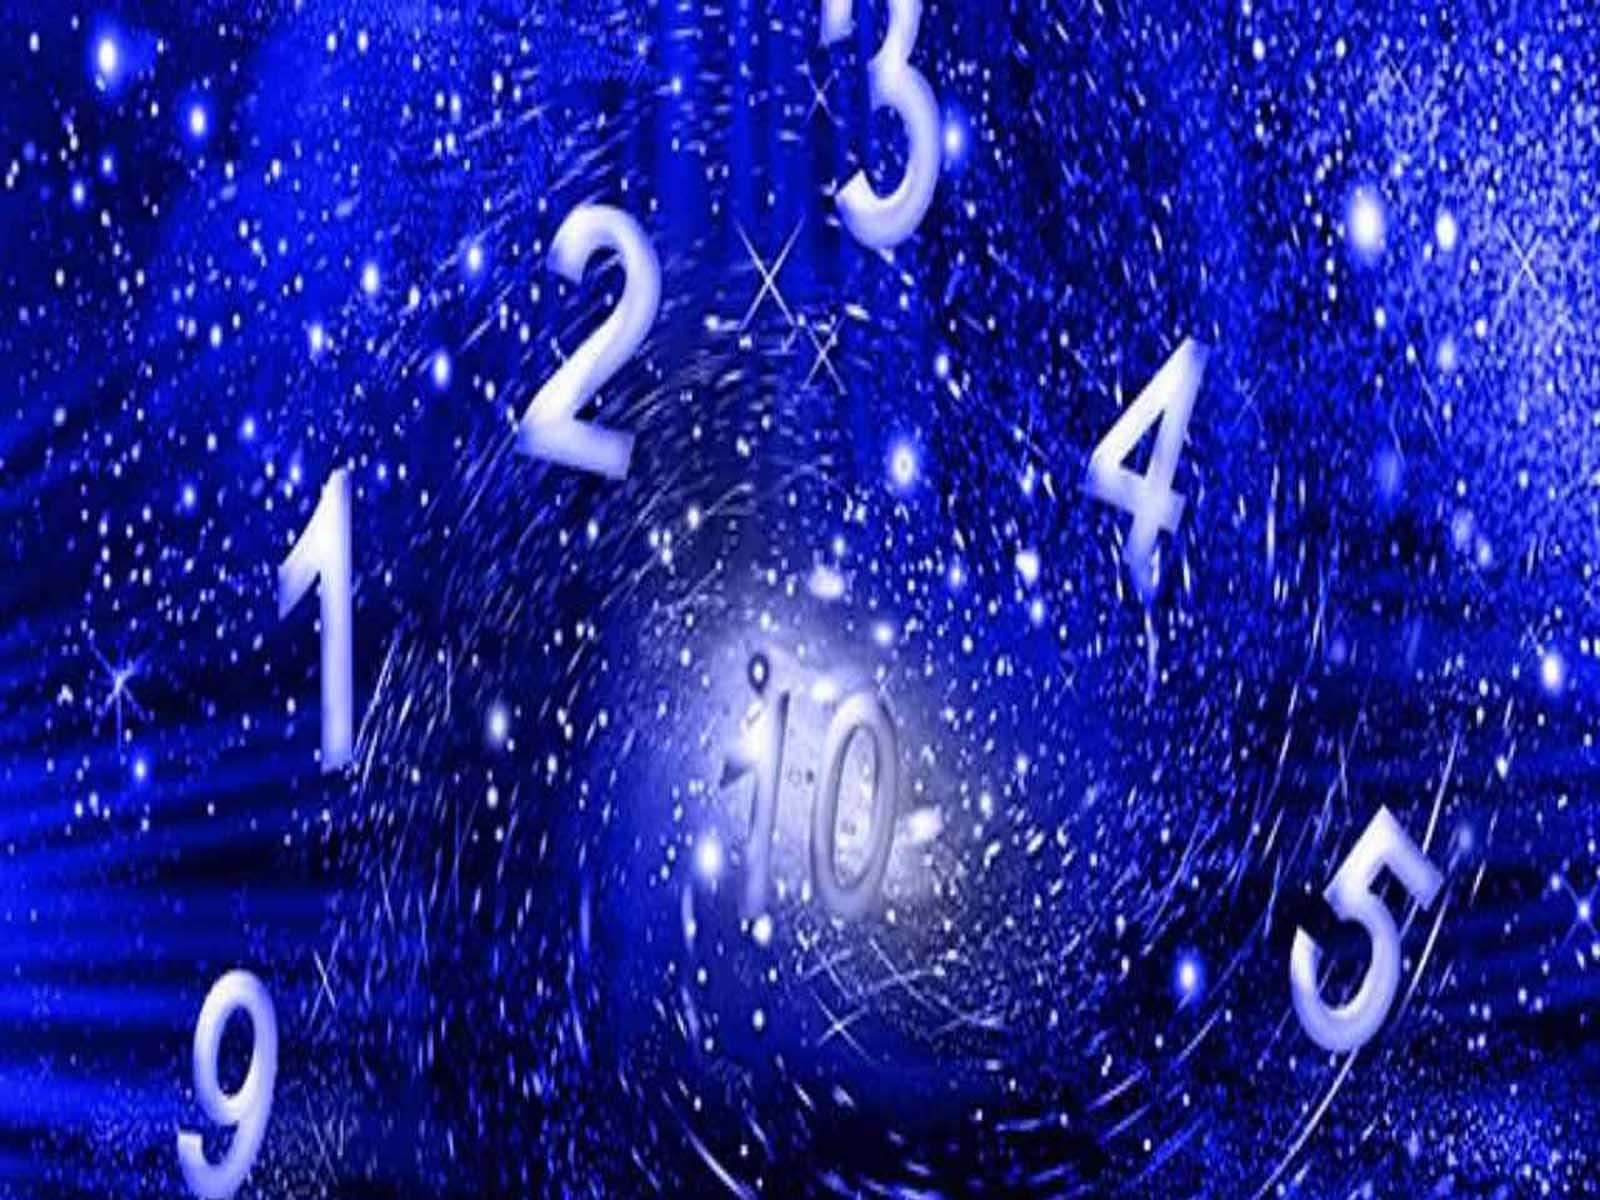 

Numerology Today 3 December 2022: